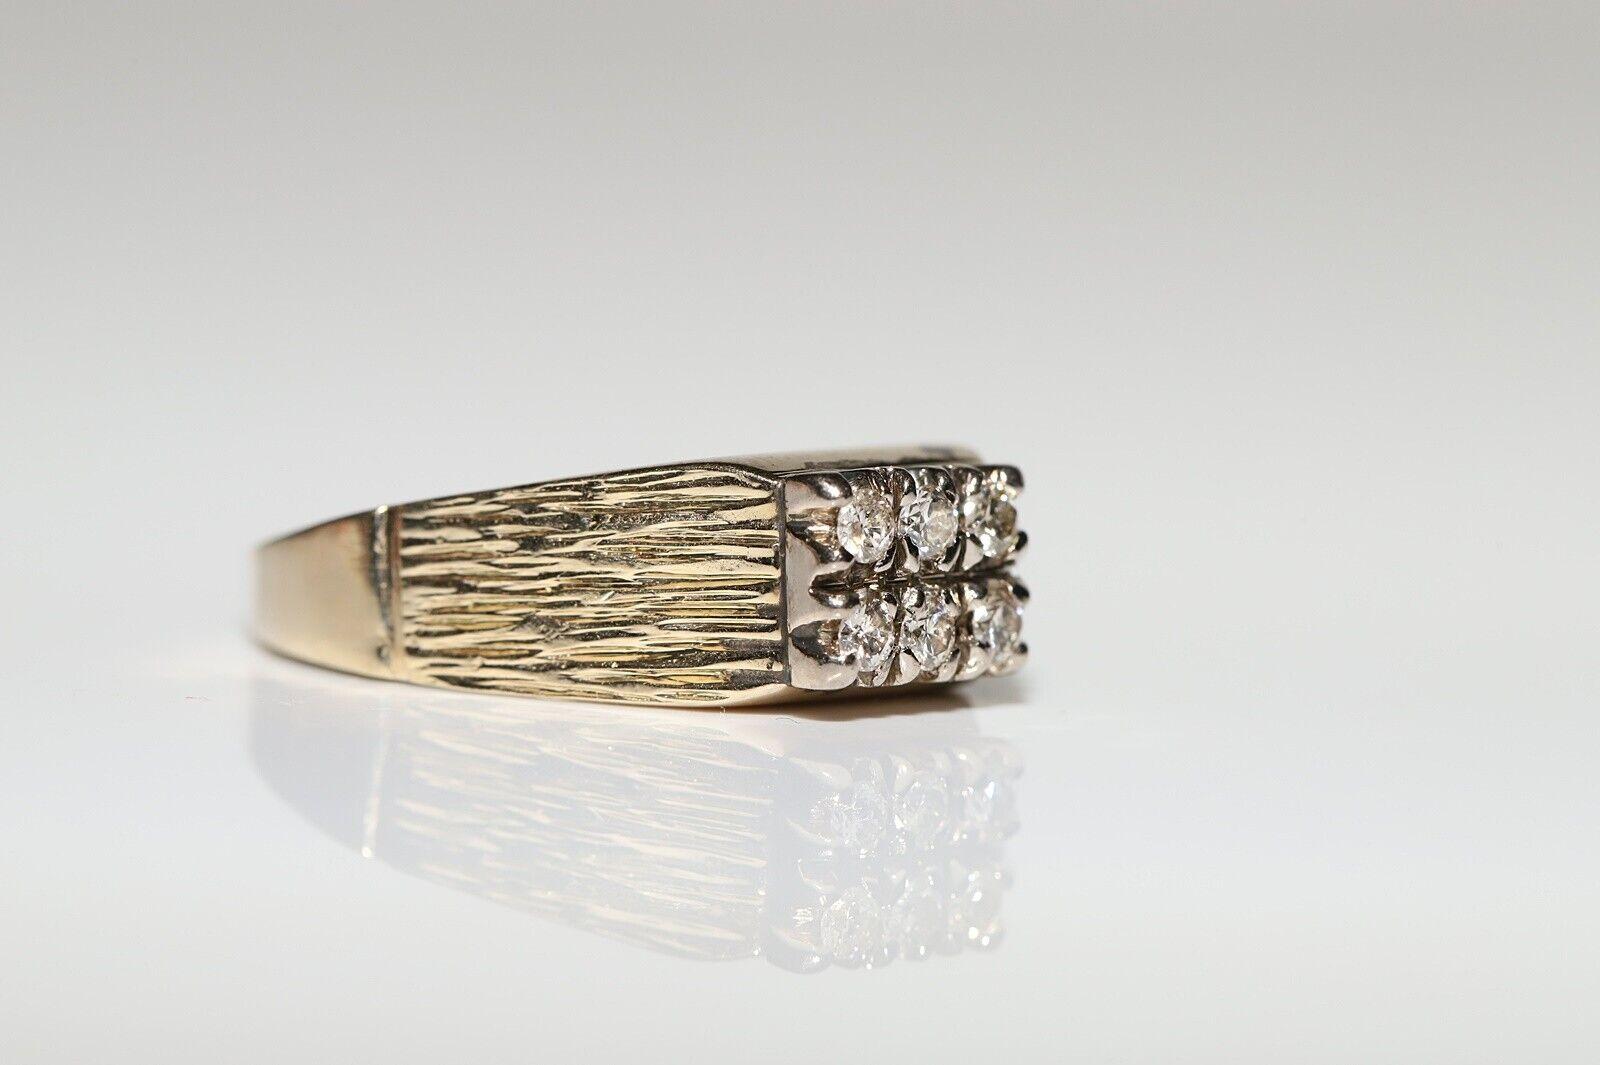 Vintage Circa 1980s 14k Gold Natural Diamond Decorated Ring  In Good Condition For Sale In Fatih/İstanbul, 34